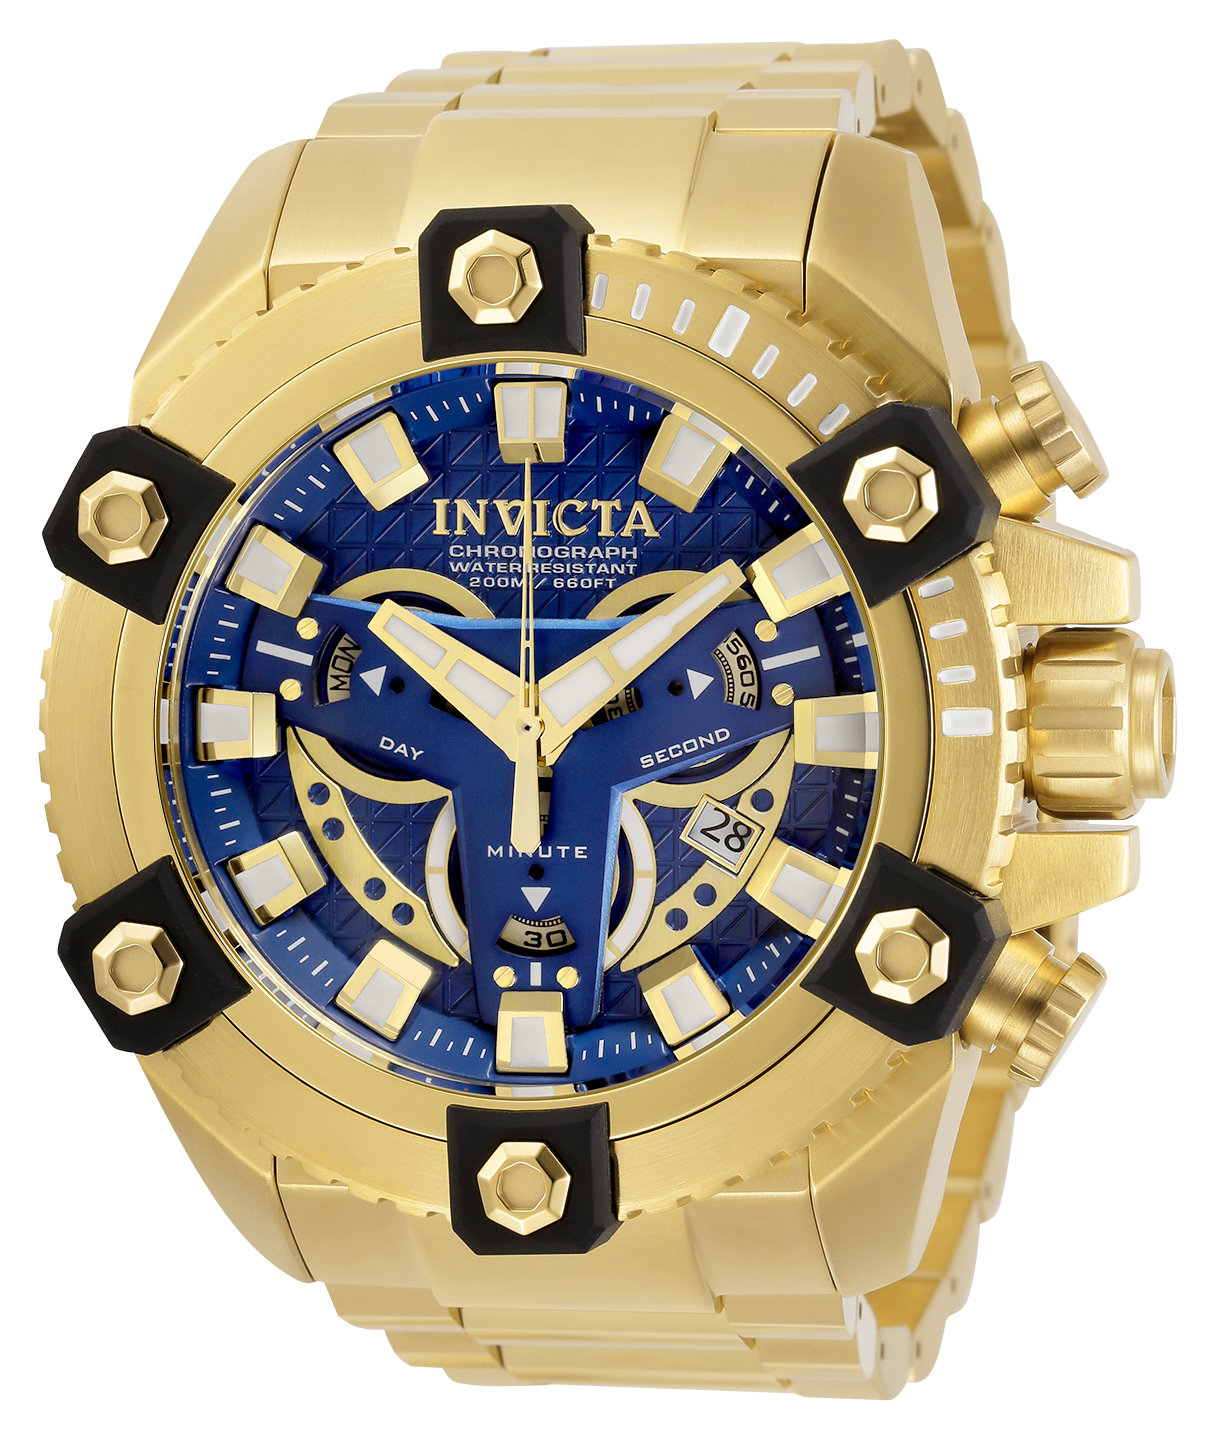 Invicta Coalition Forces Men's Watch - 56mm, Gold (32626)